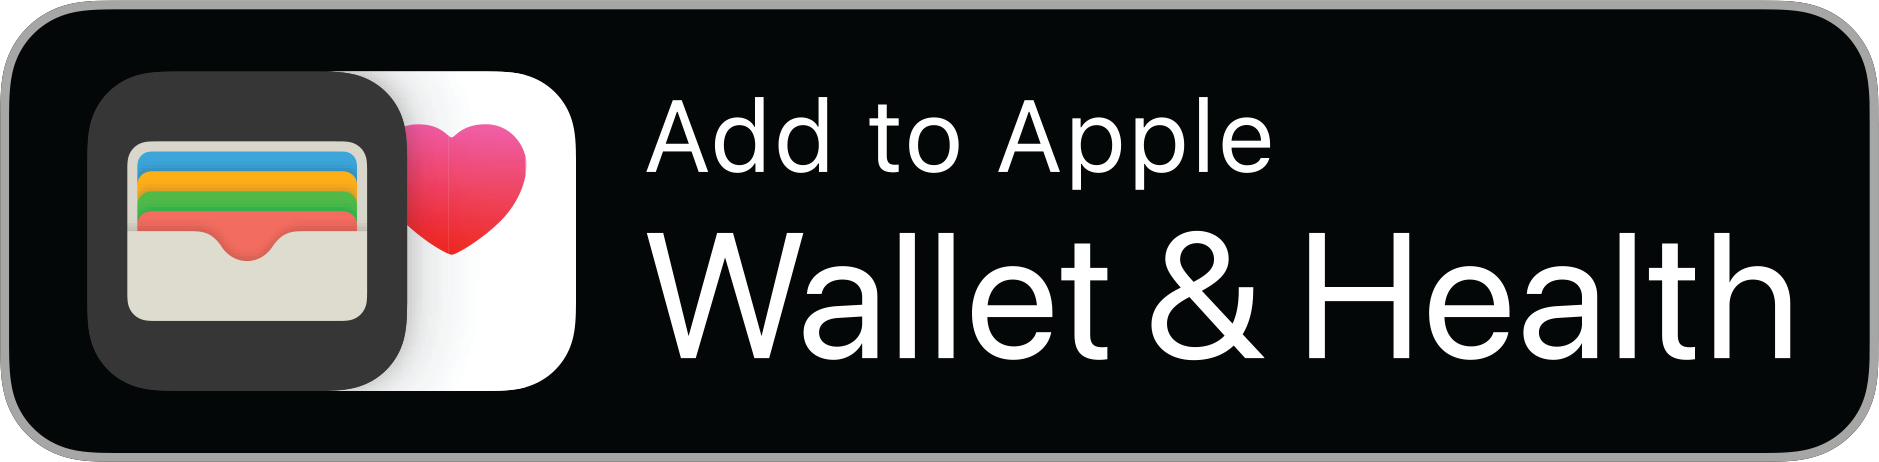 Add to Apple Wallet & Health button